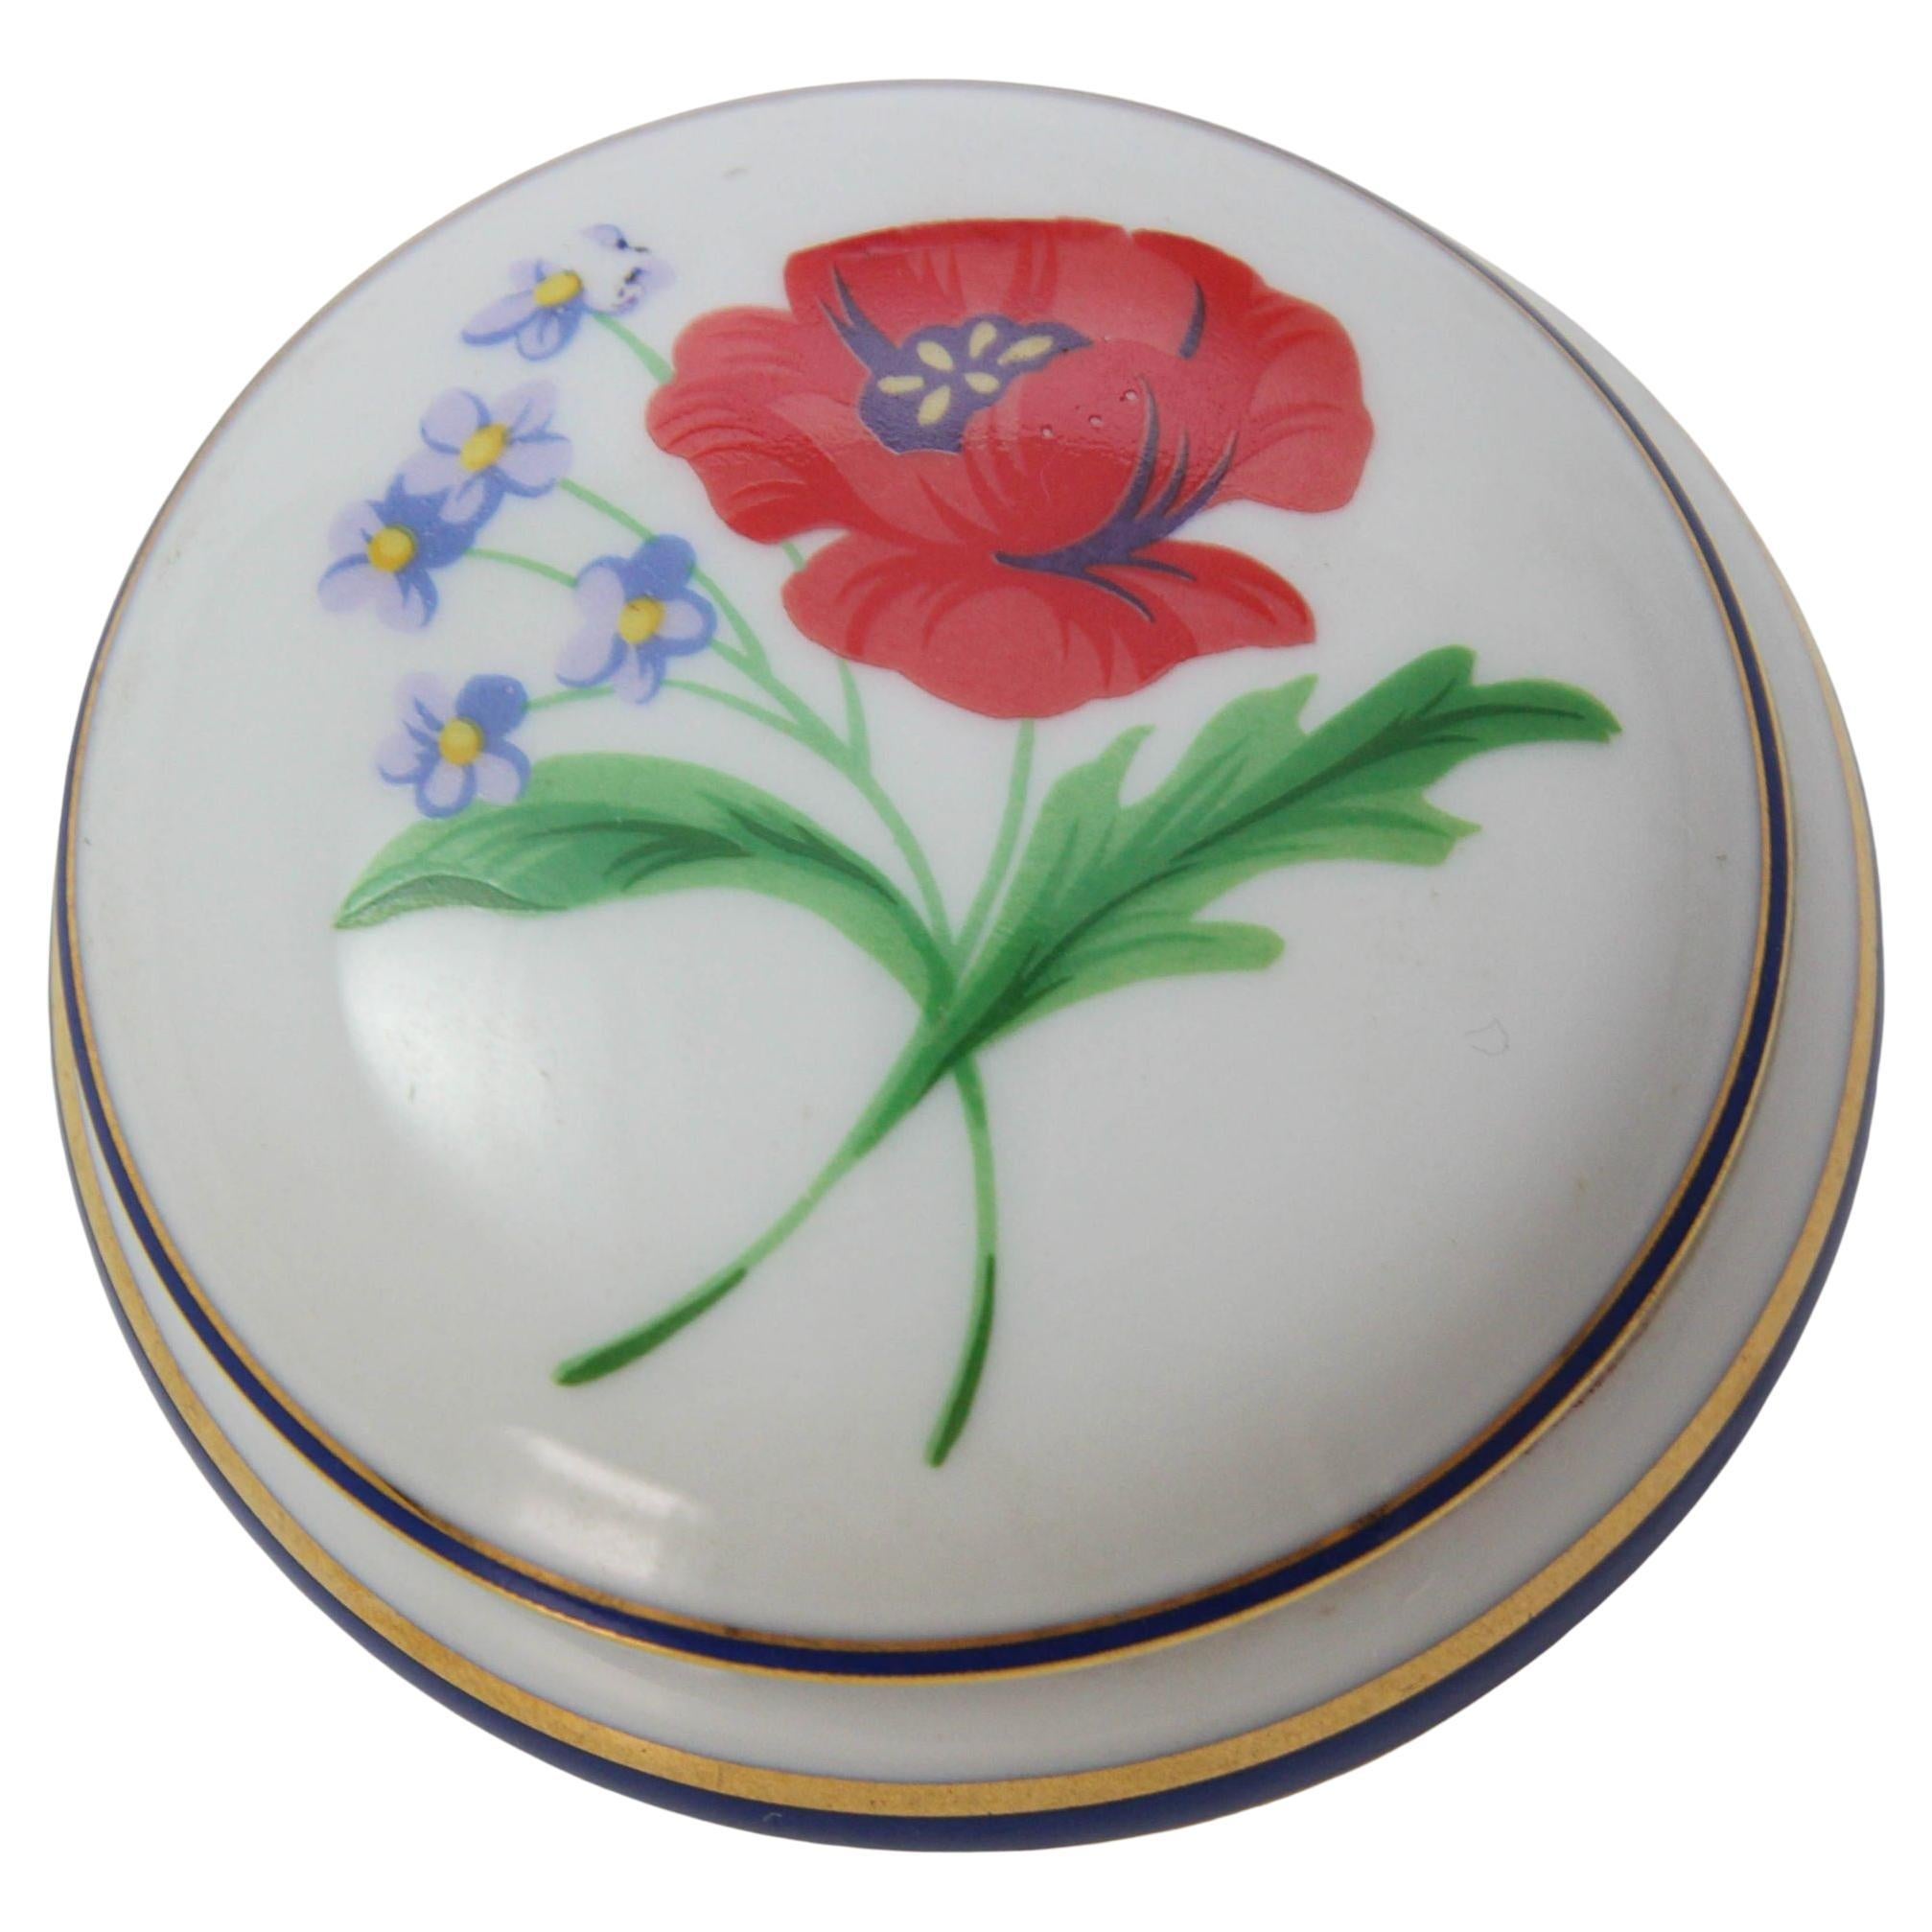 Tiffany & Co. Limoges France American Garden Round Porcelain Collectible Box For Sale